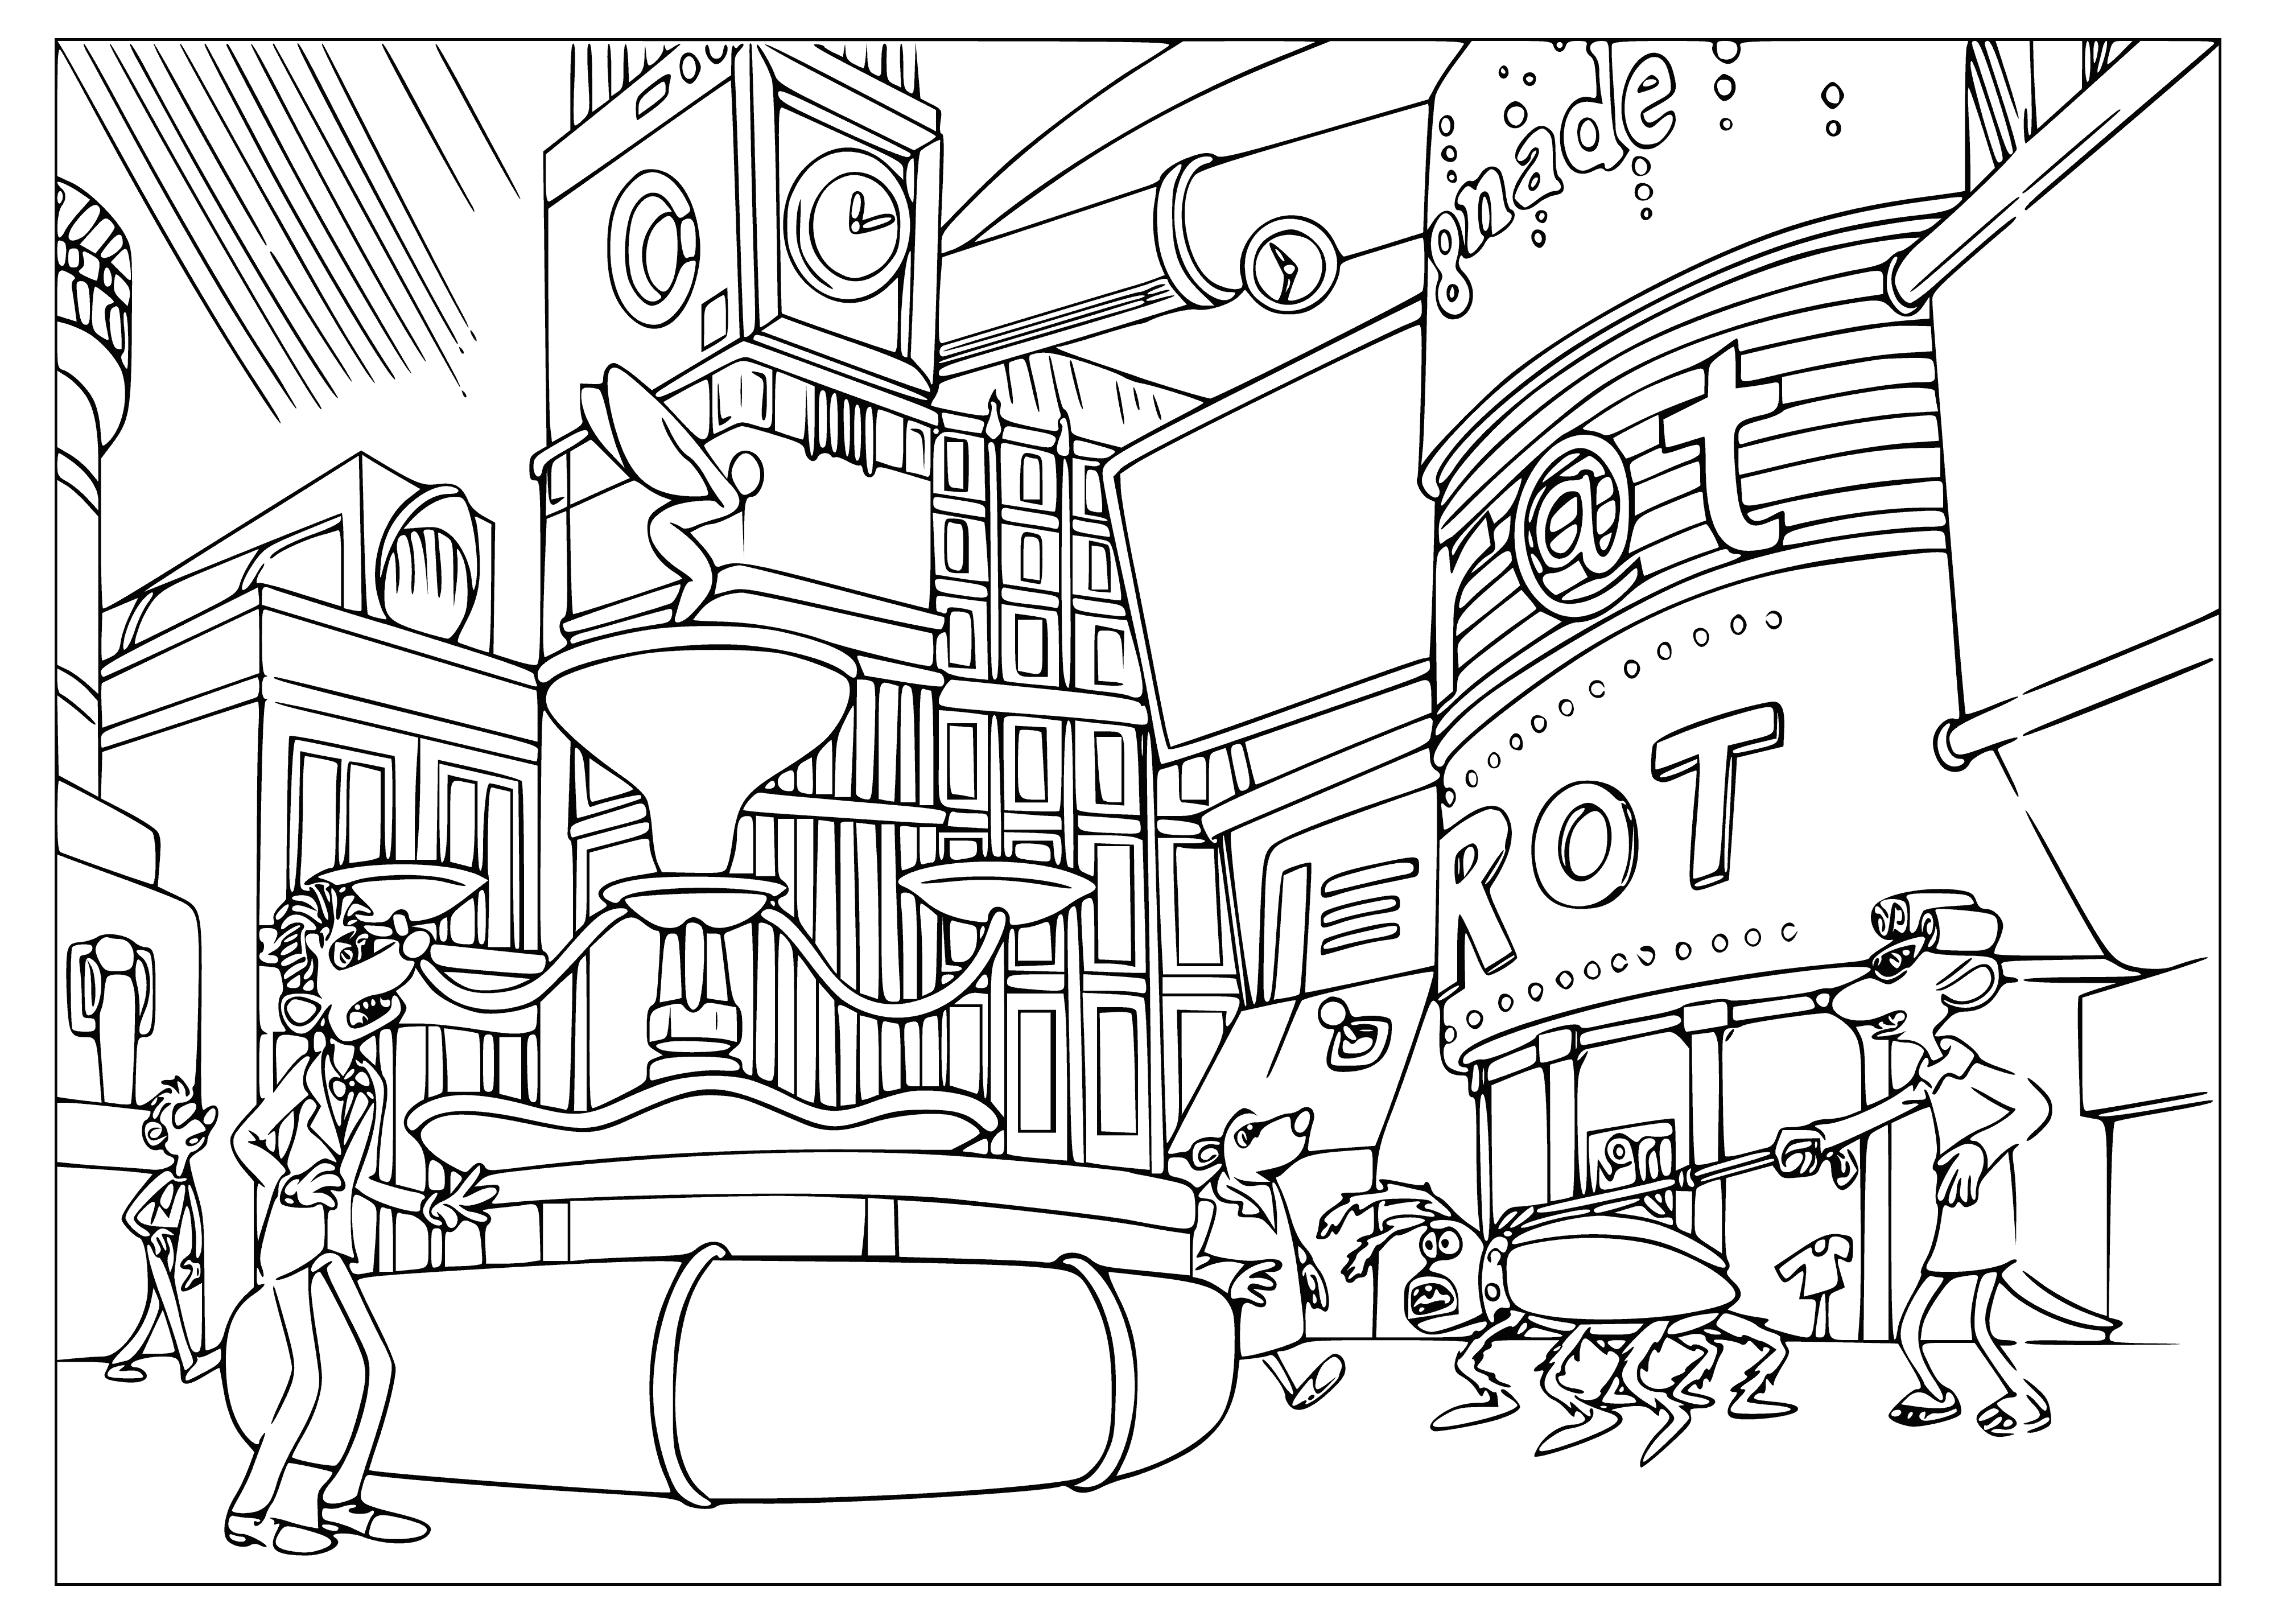 coloring page: City built of sewage, mouse & rat on left & right, deep blue sky & stars. Mouse w/flashlight, rat w/fishing rod.